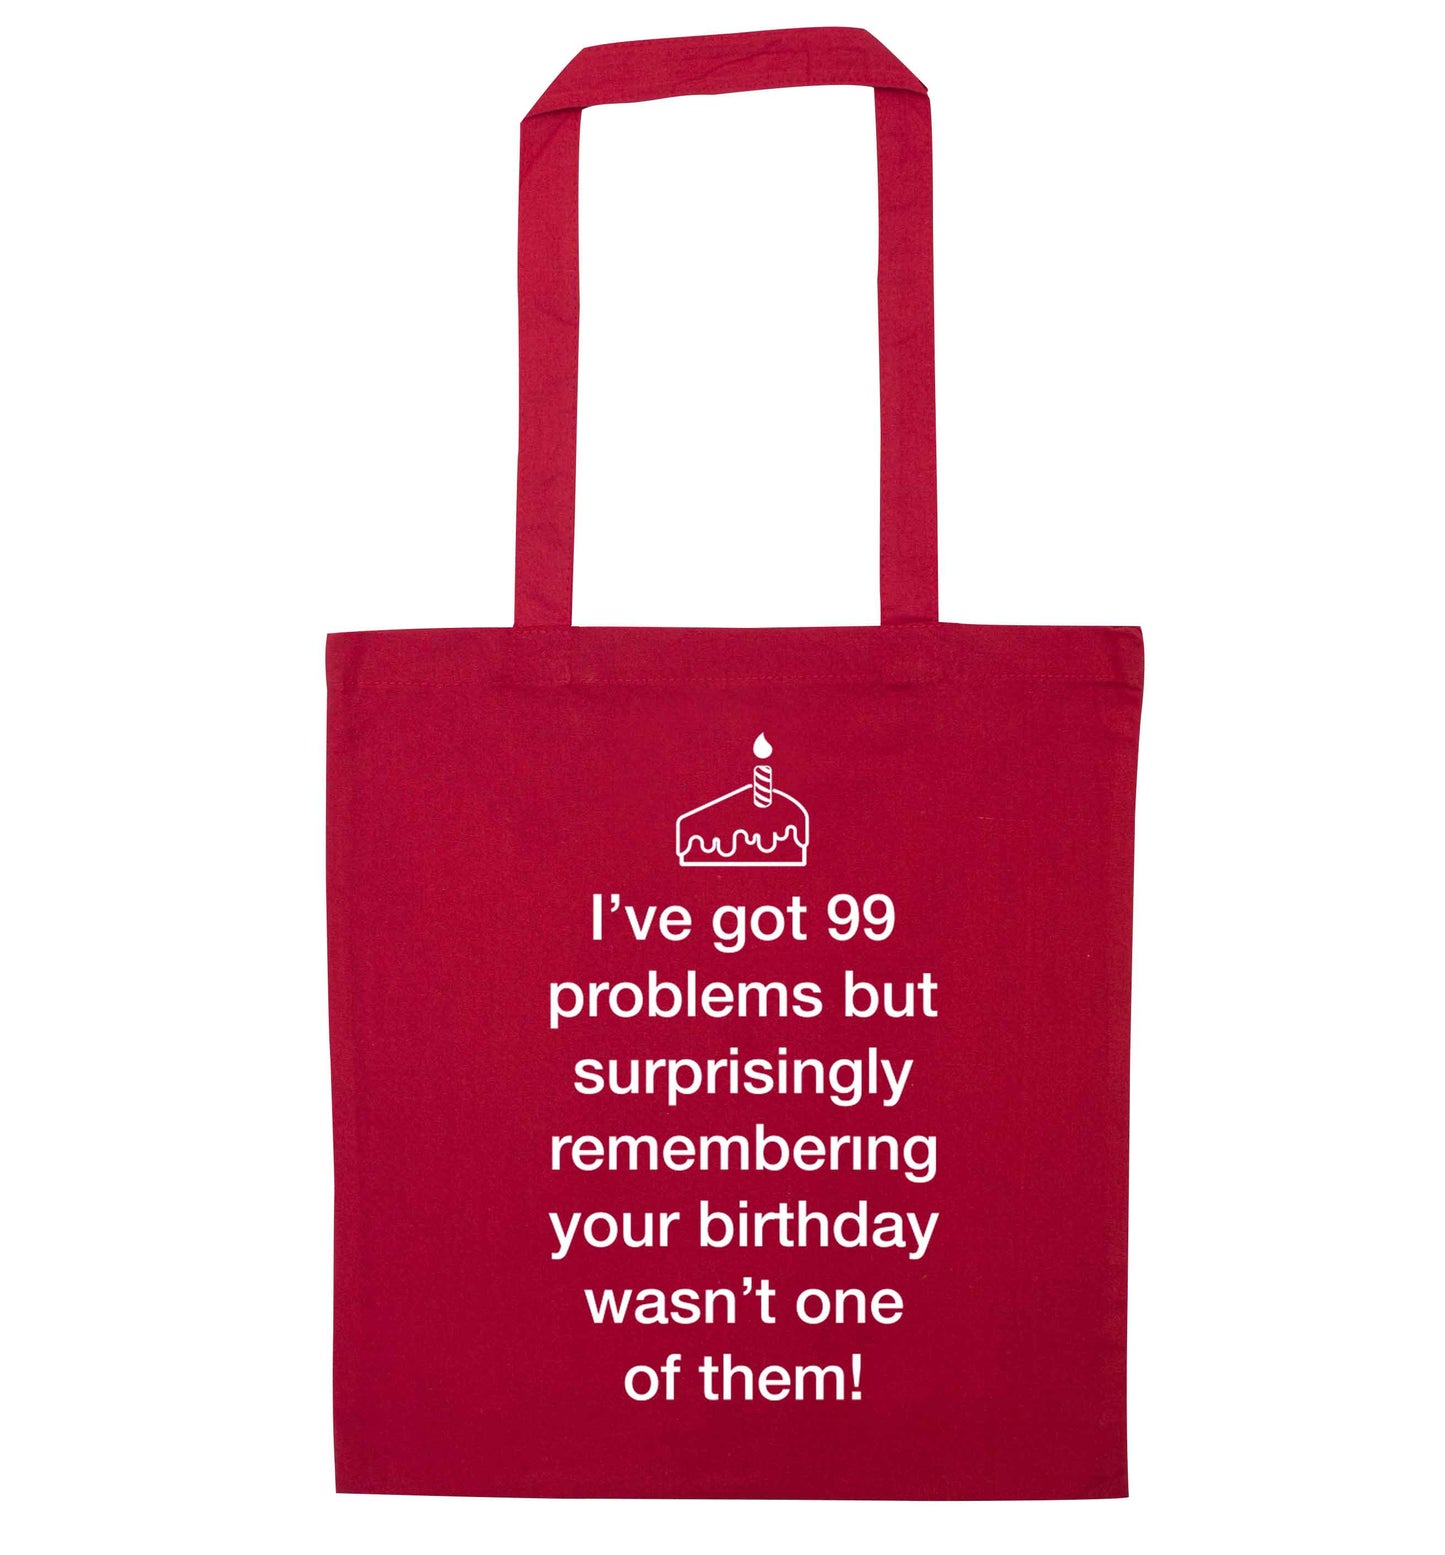 I've got 99 problems but surprisingly remembering your birthday wasn't one of them! red tote bag